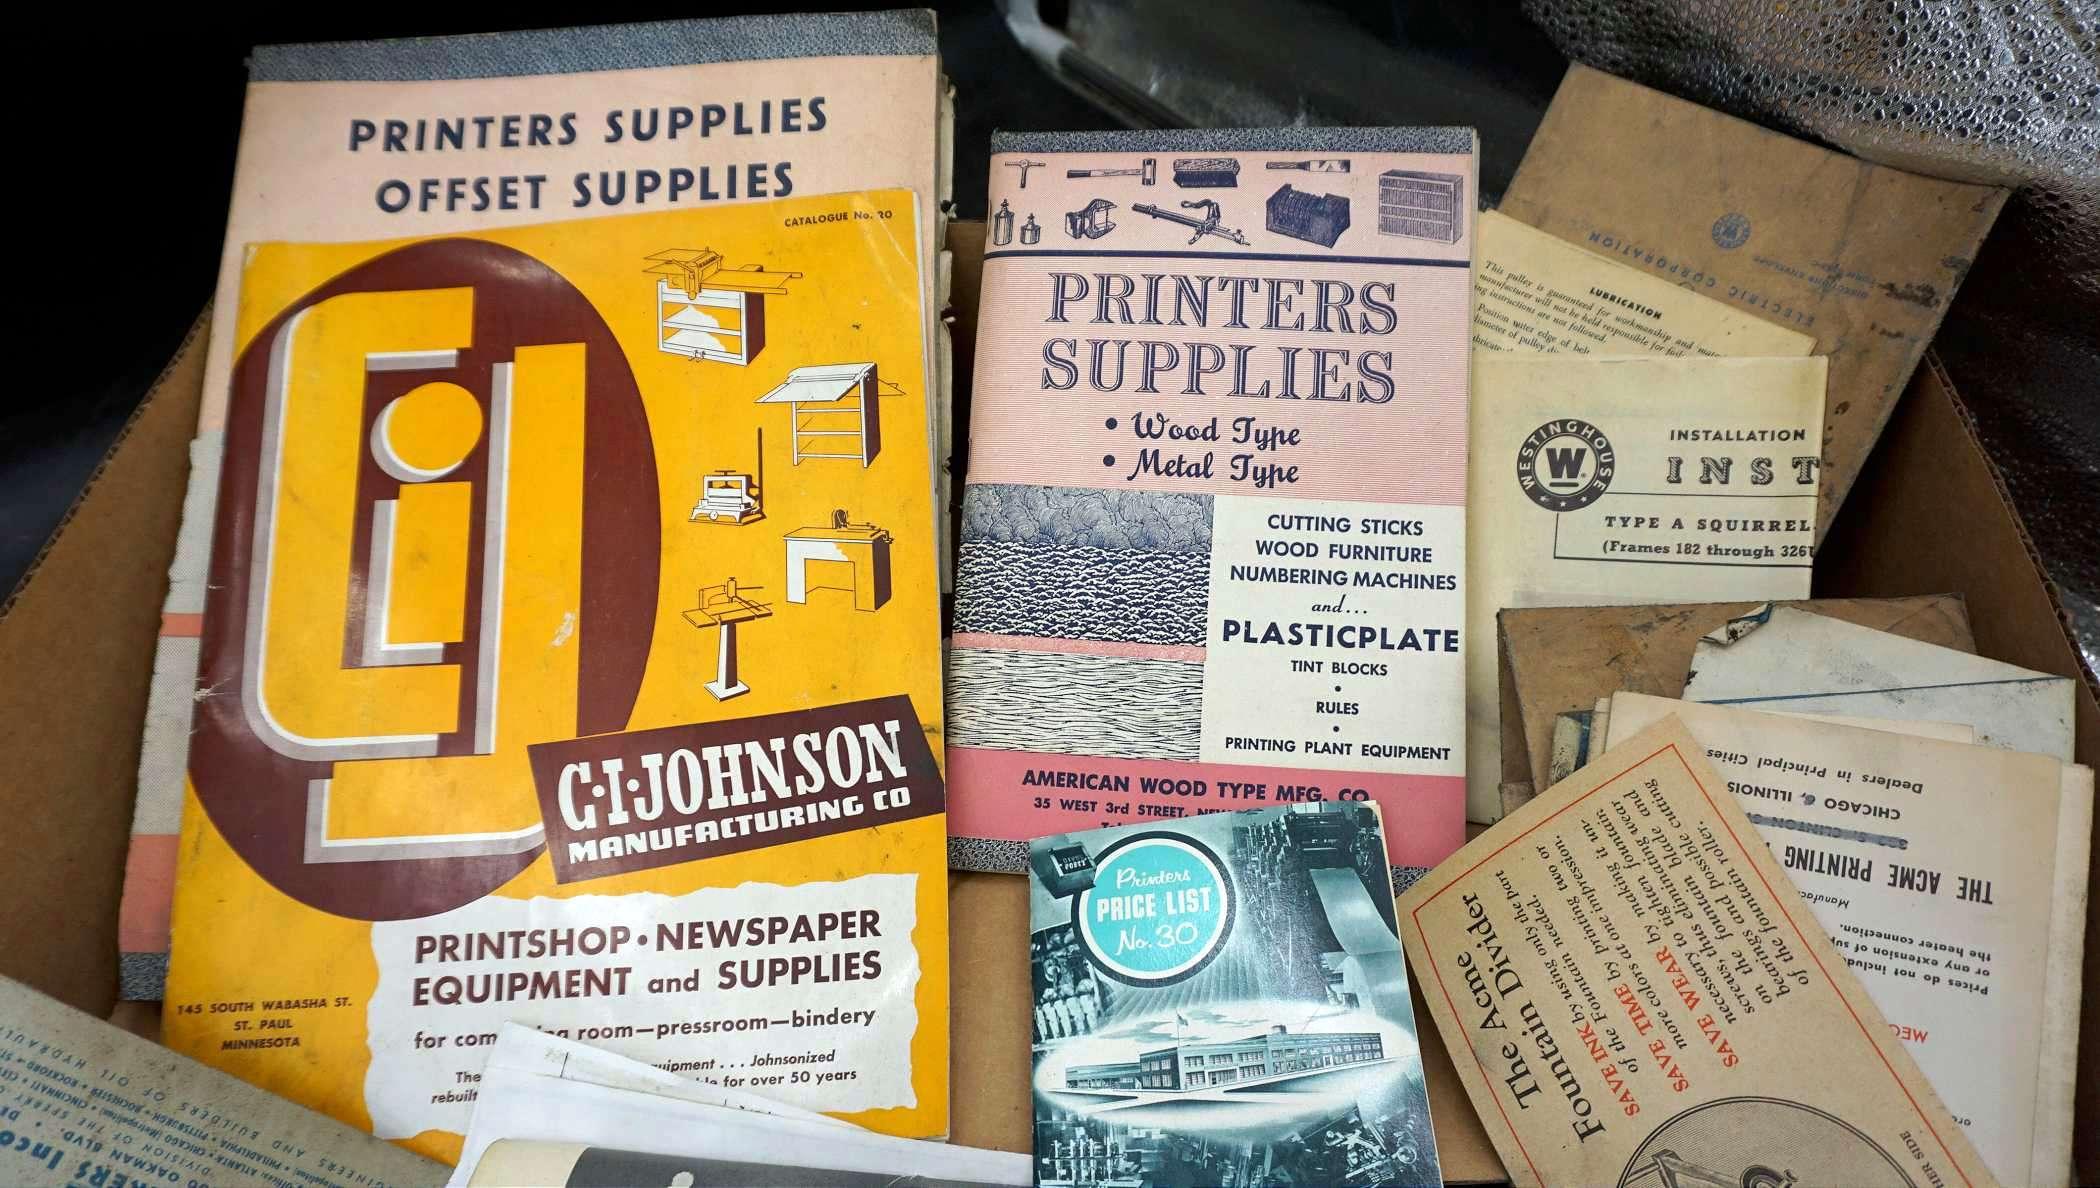 Printing Books, Pamphlets - From Old Lennox Independent Building!